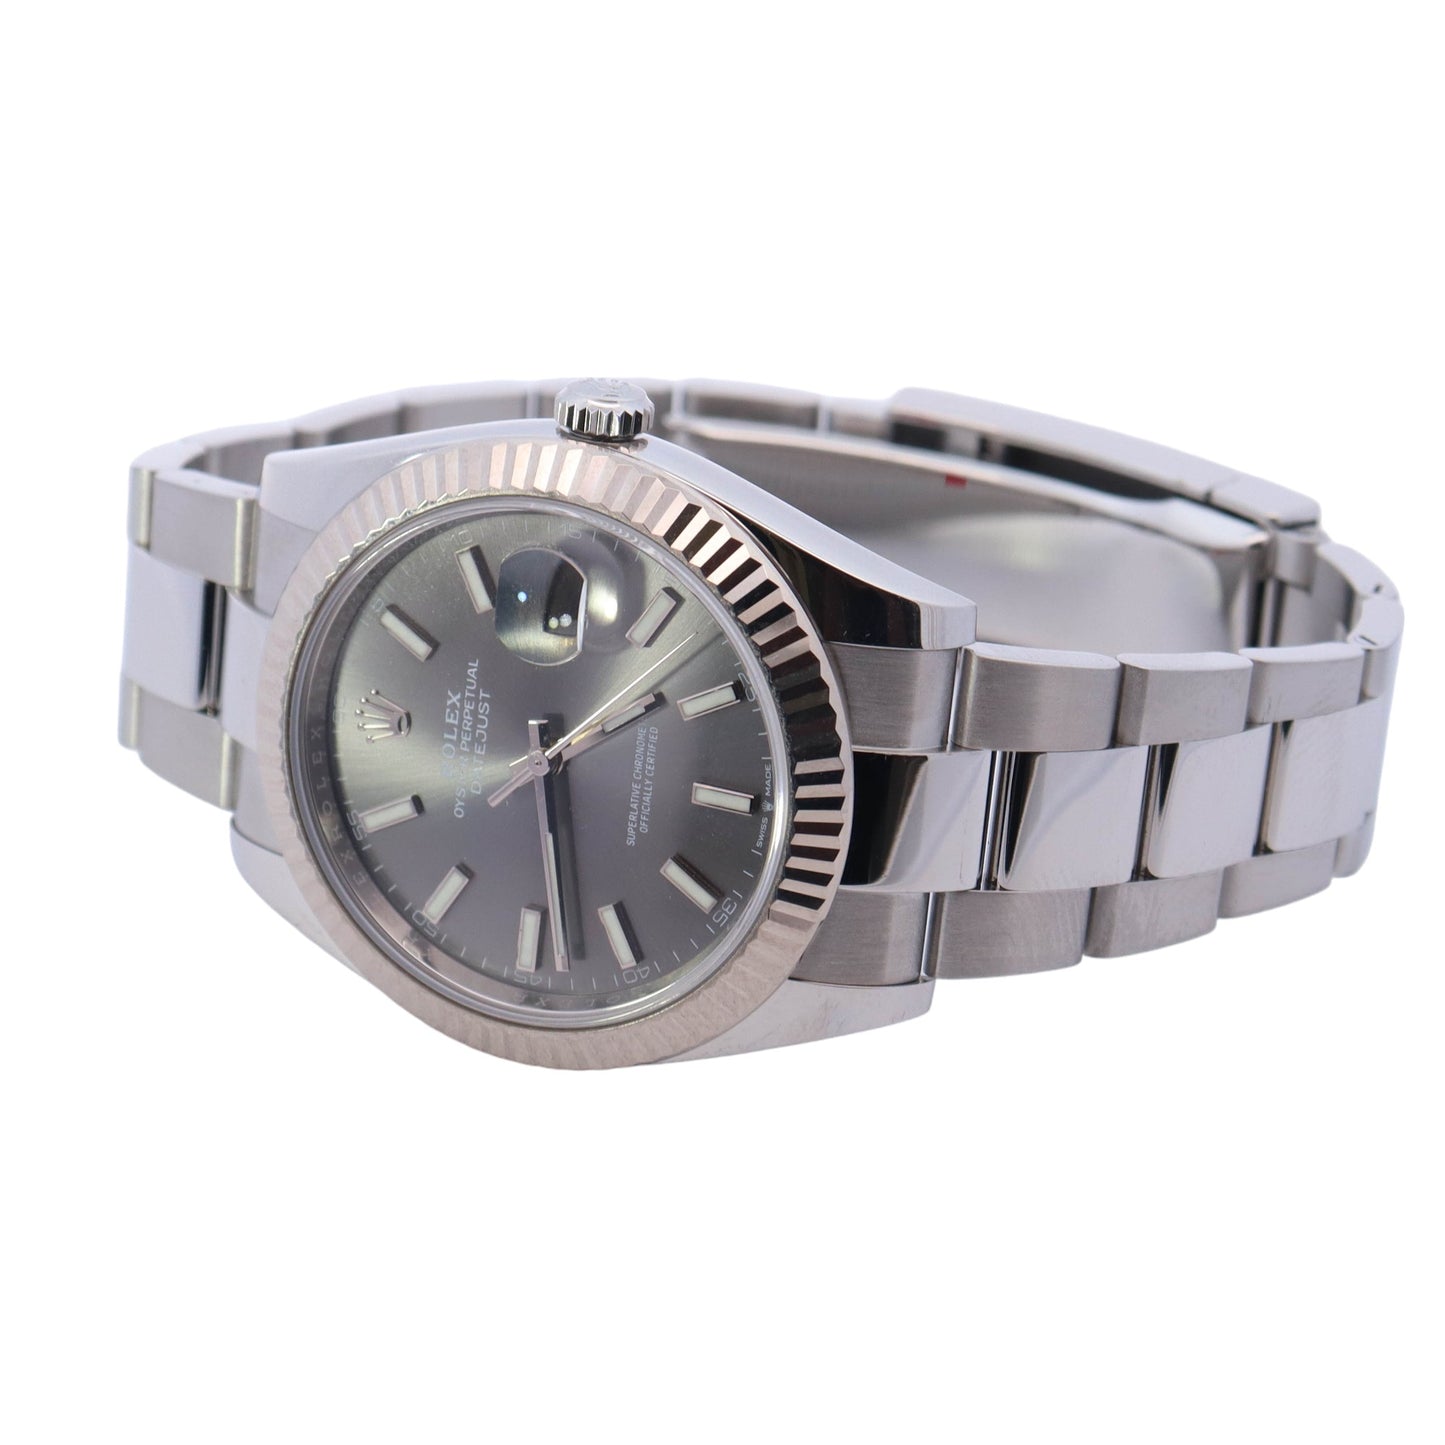 Rolex Datejust Stainless Steel 41mm Rhodium Stick Dial Watch Reference# 126234